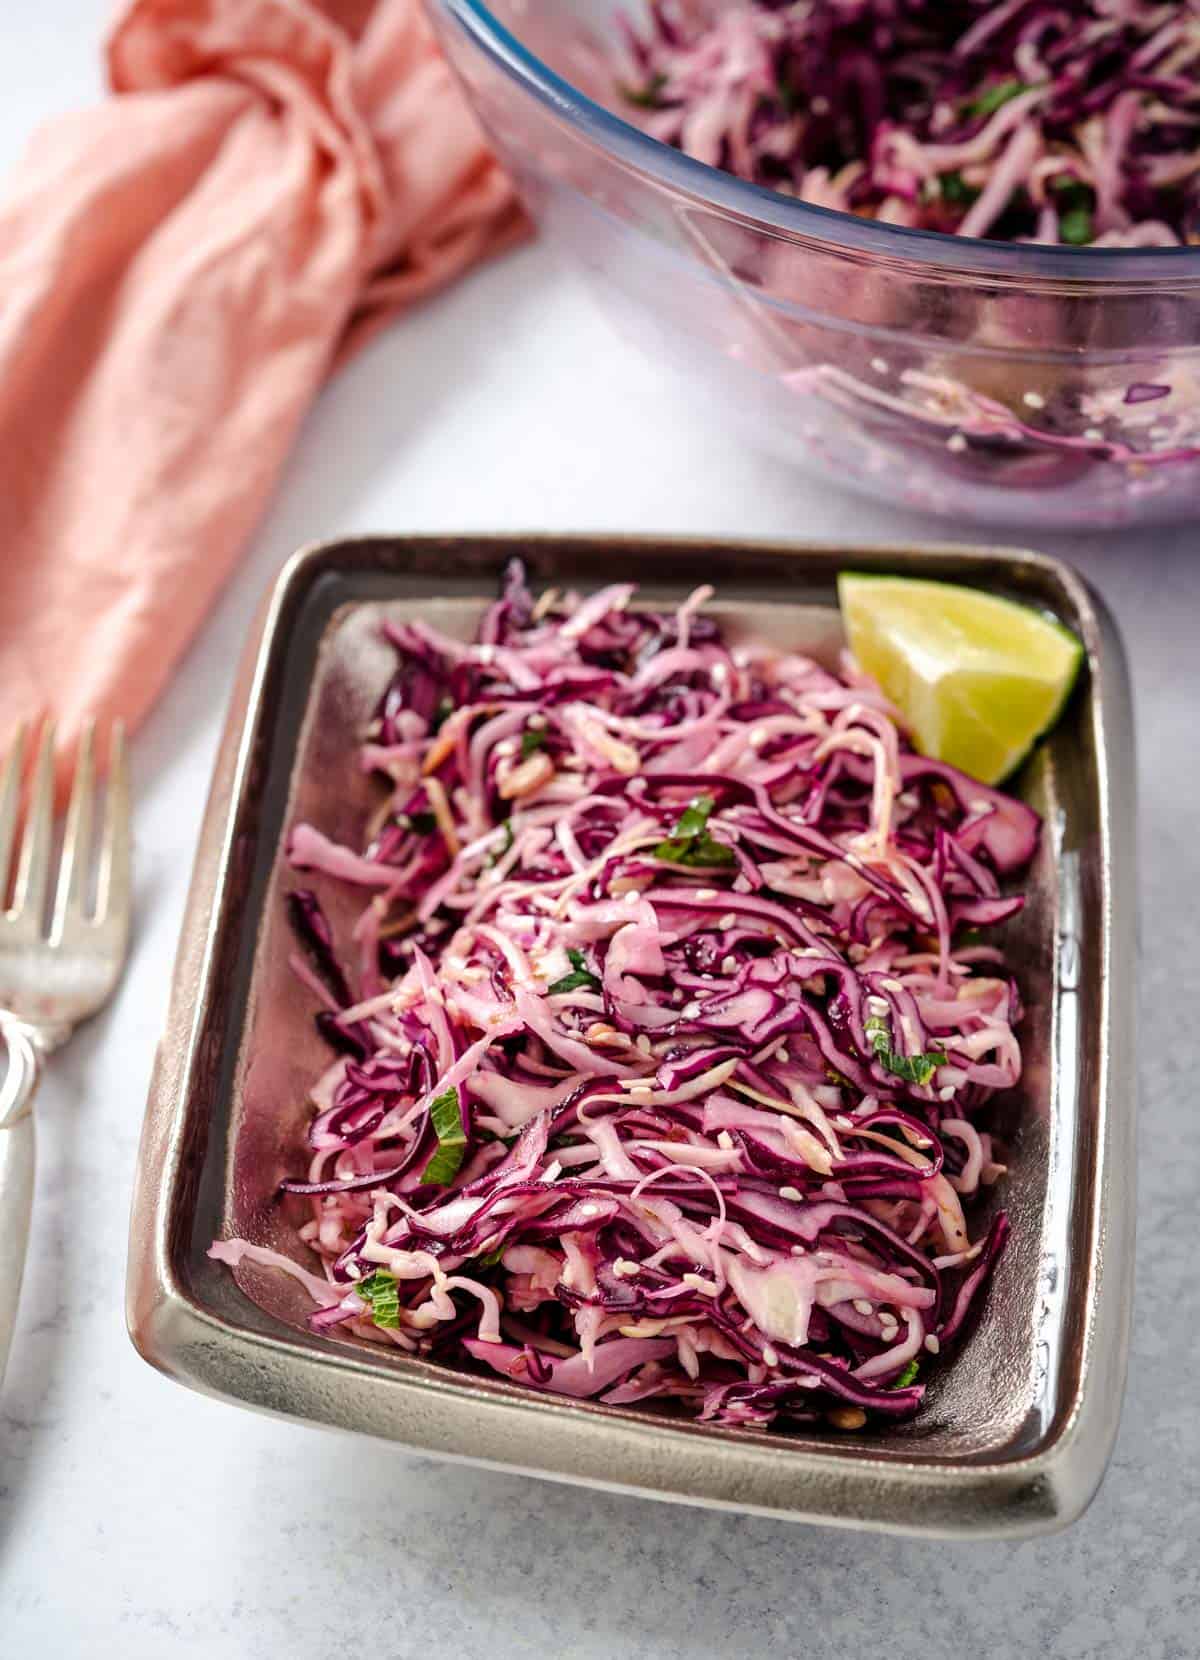 crunch cabbage salad with lemon wedge in dish